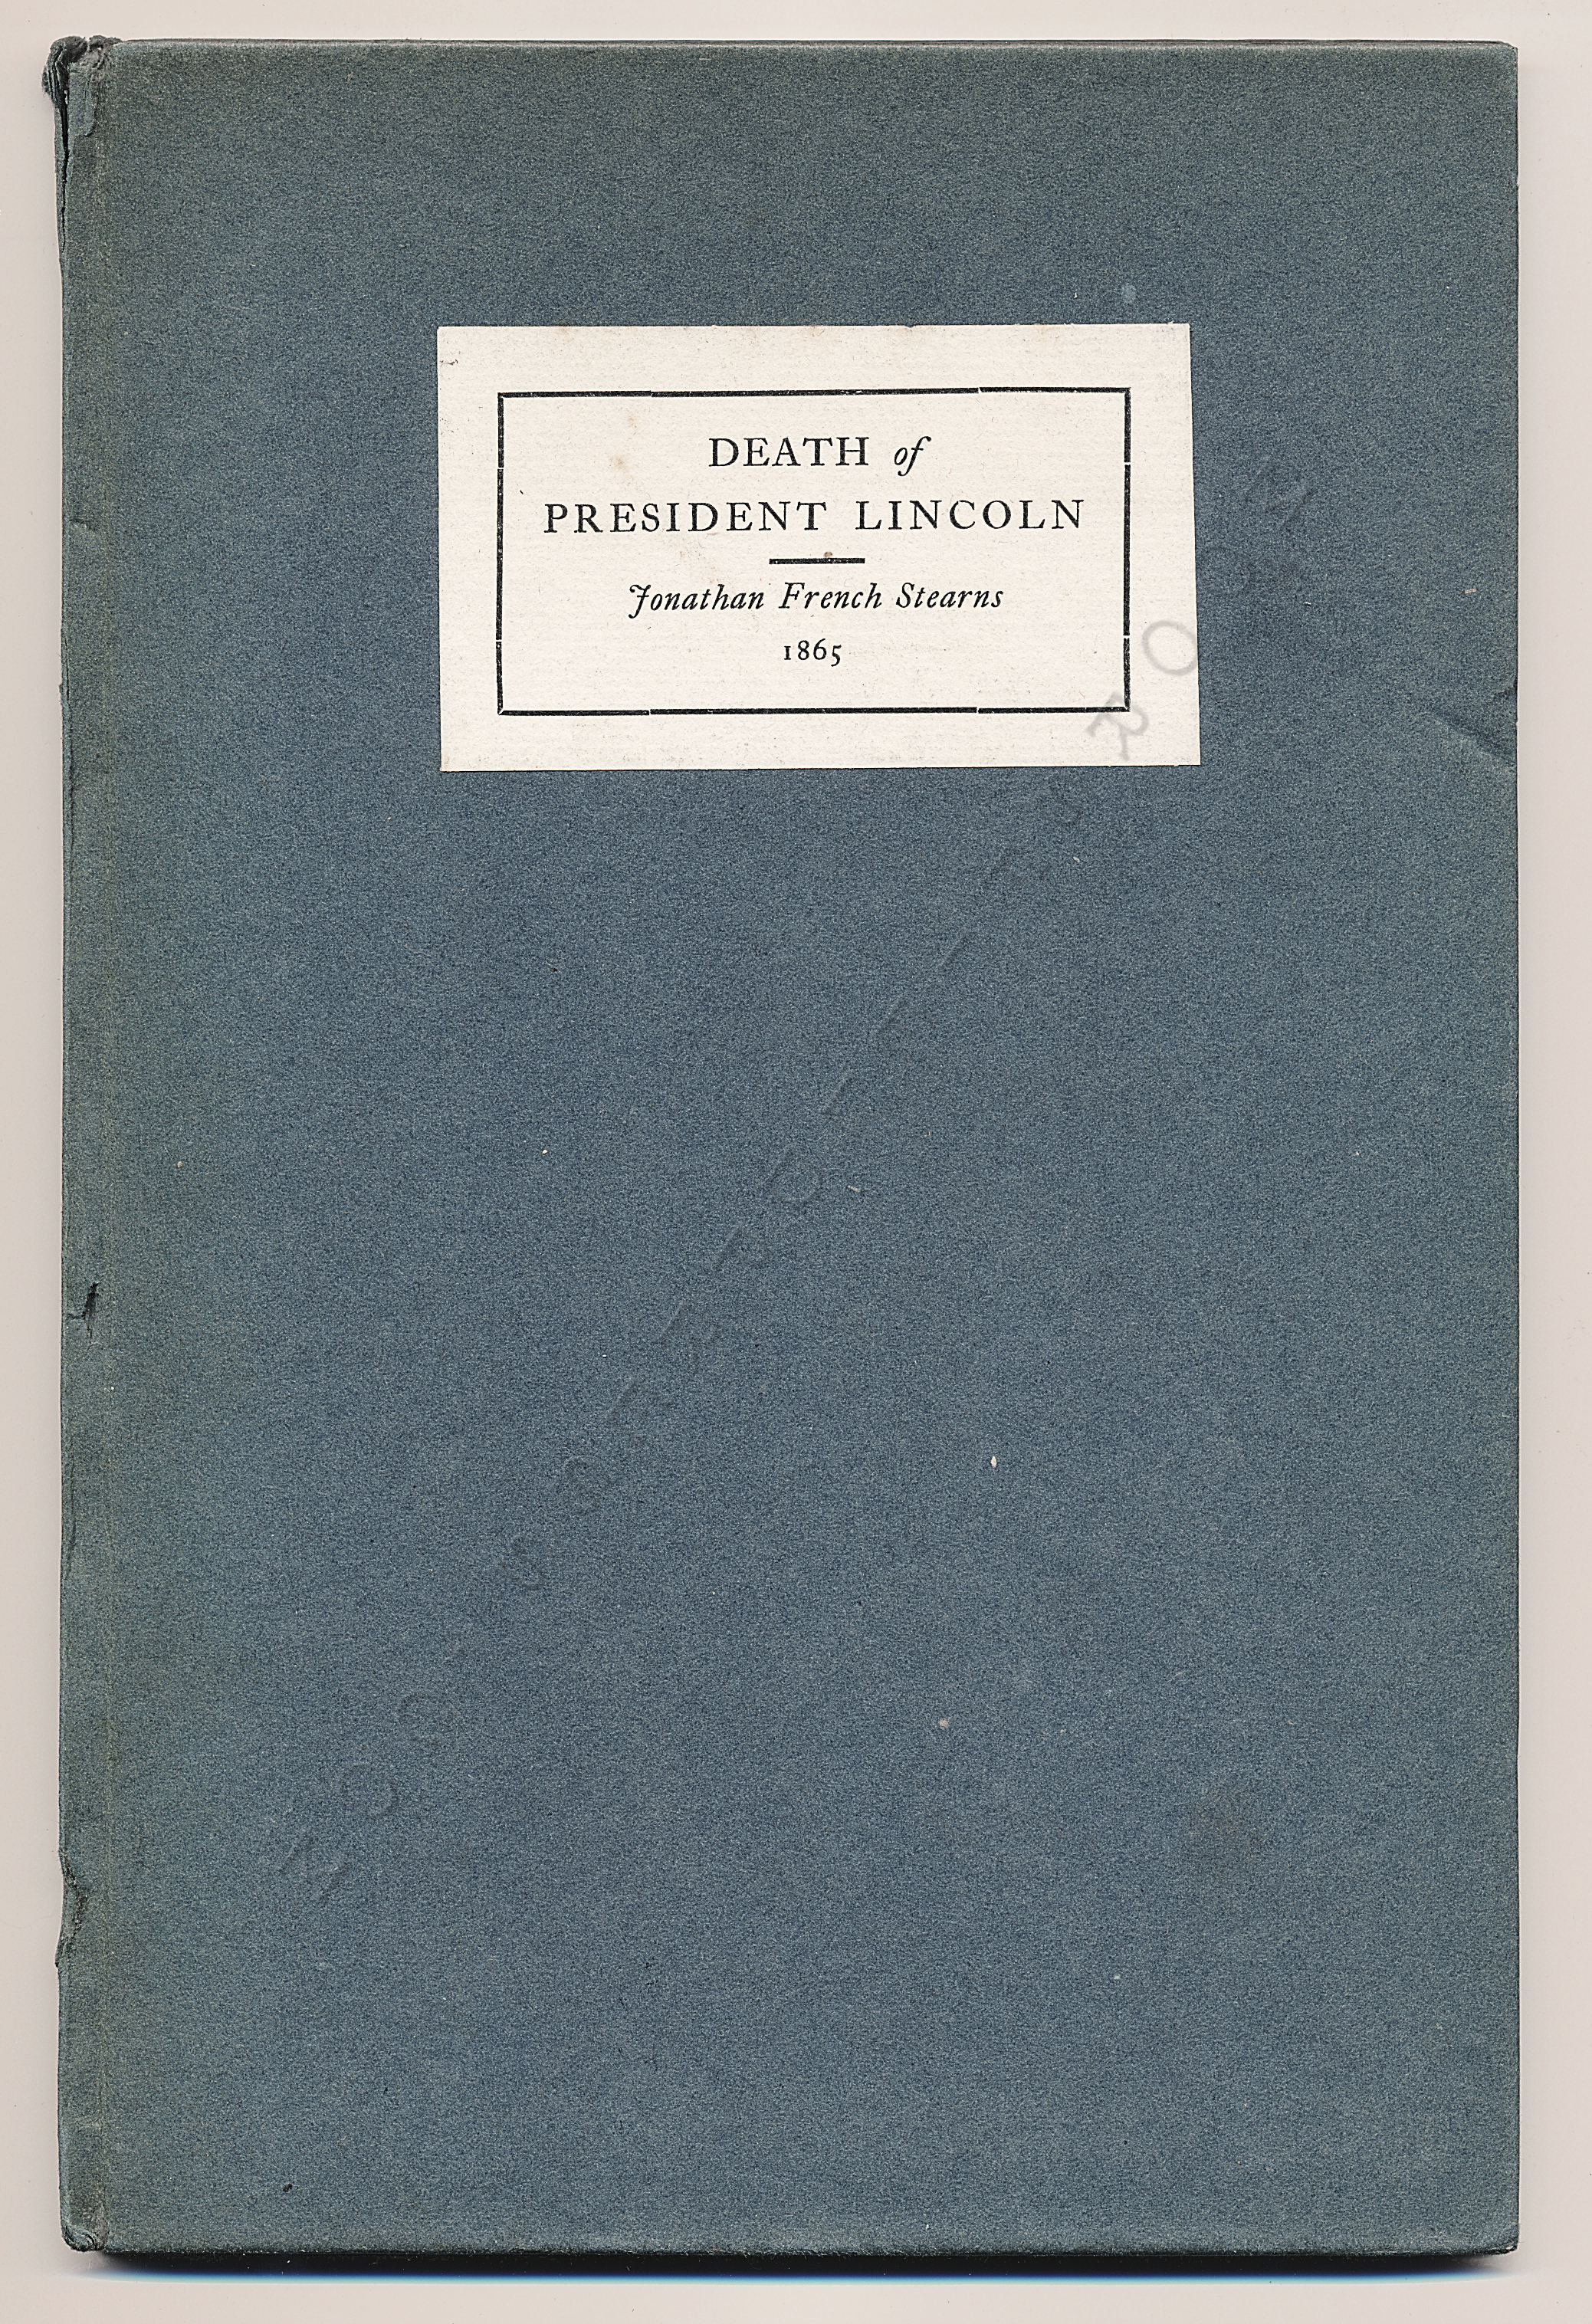 death of president lincoln by
                jonathan french stearns 1865